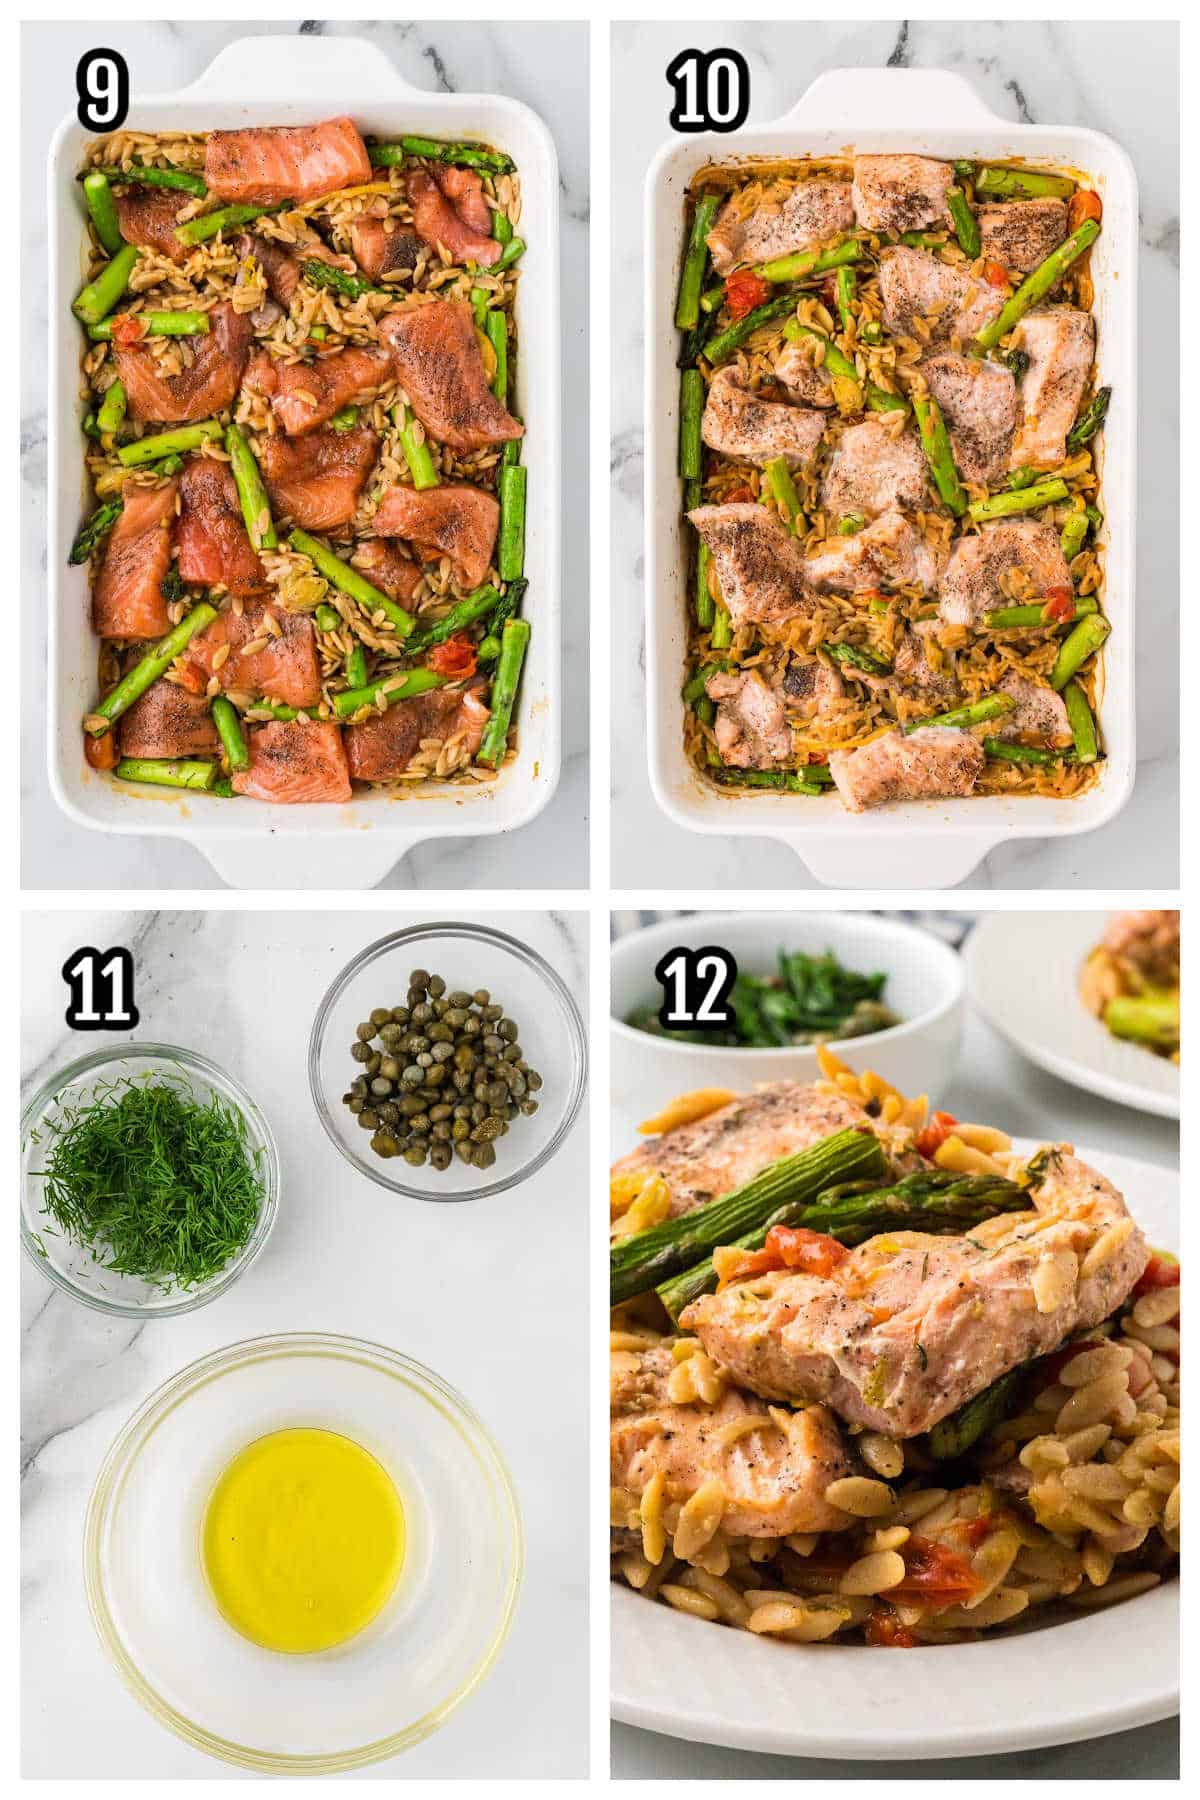 The third and final collage shows steps nine through twelve for making the baked salmon recipe with lemon and orzo pasta. 